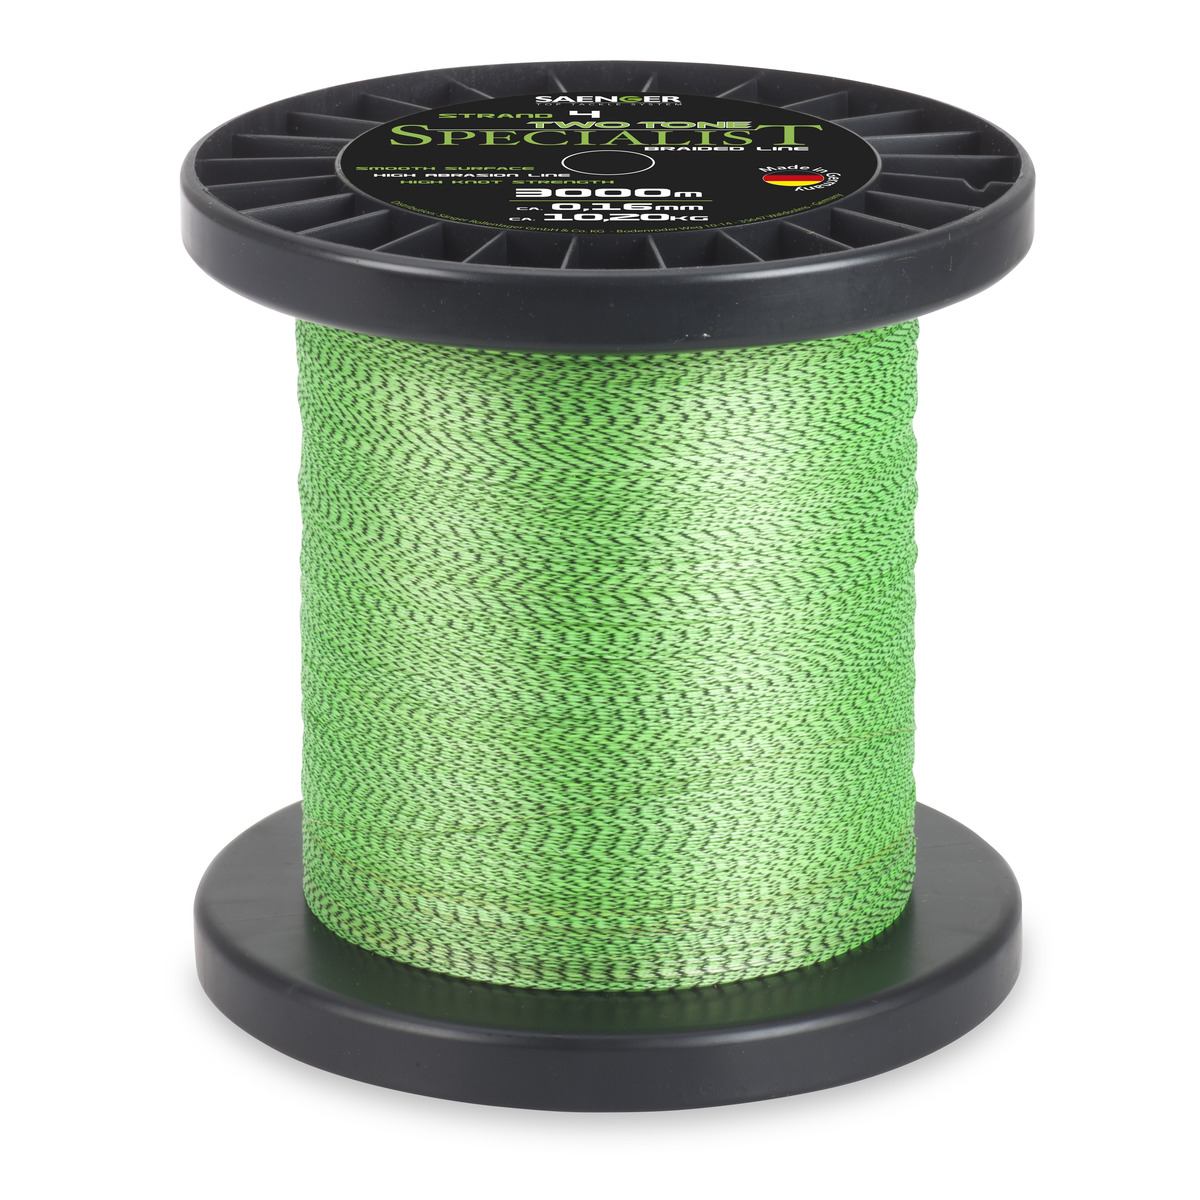 Saenger Specialist Two Tone Fluo Braid - 0,18 mm - 12,4 kg 3000 m